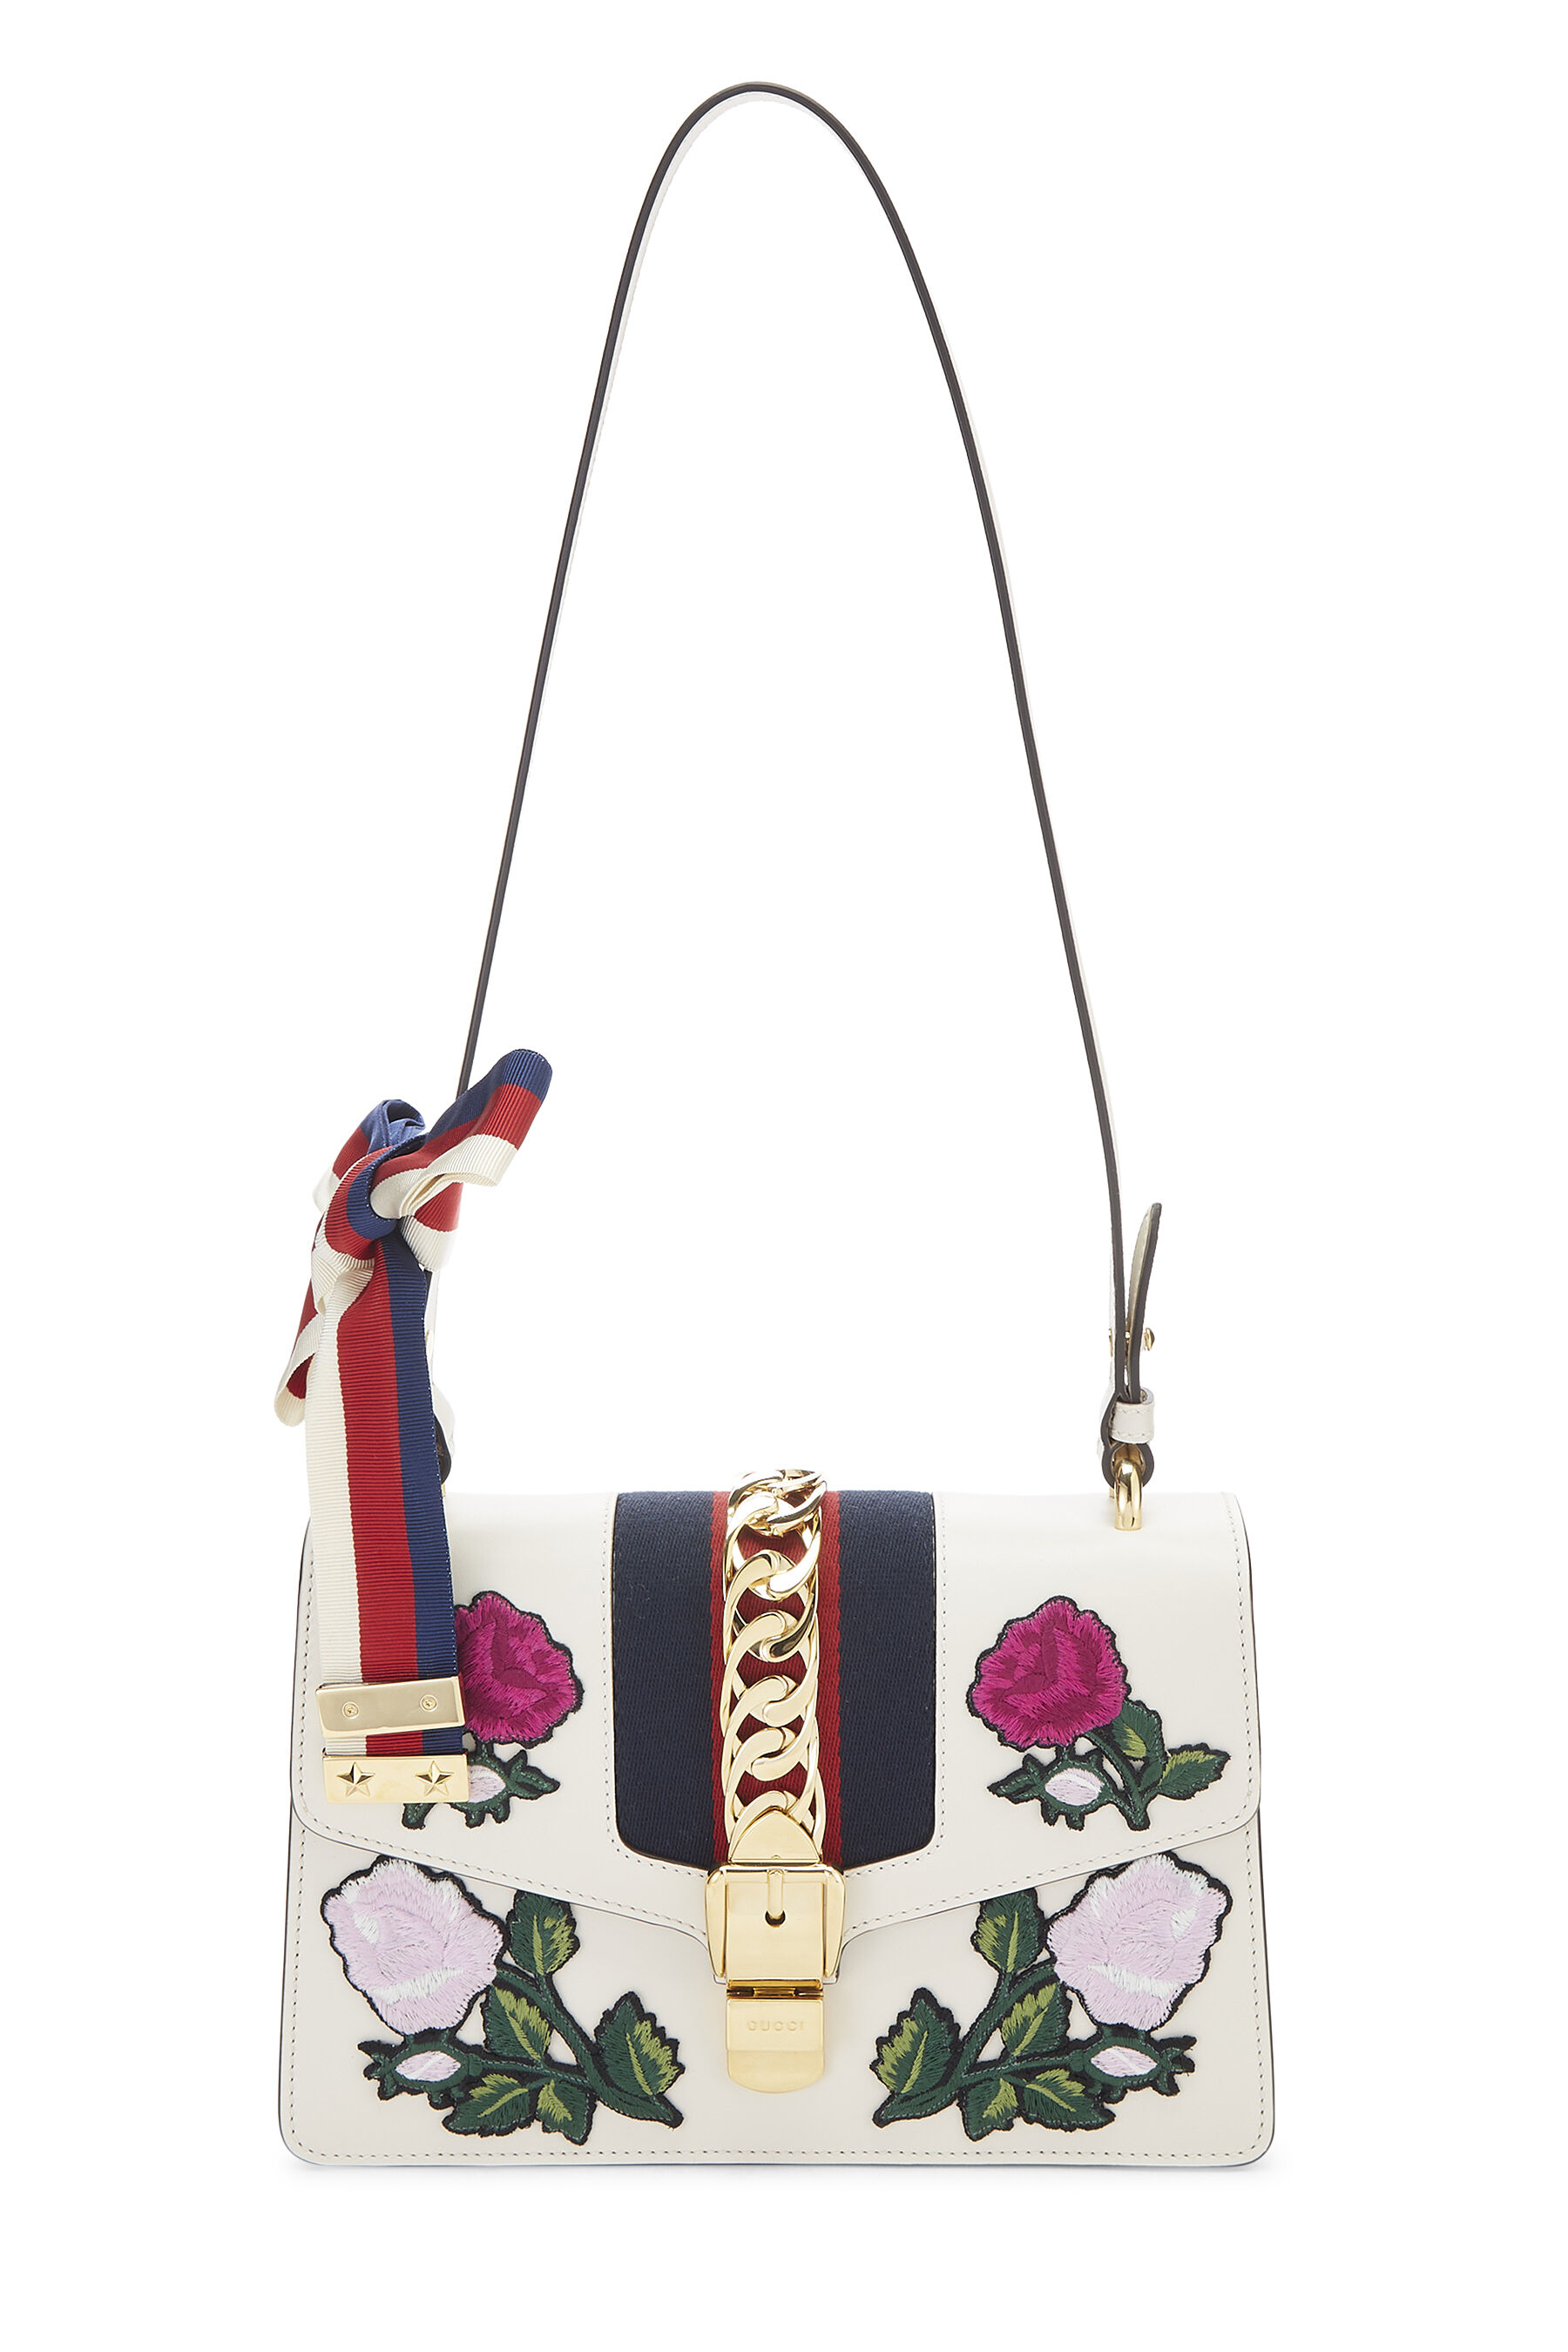 Gucci White Floral Embroidered Leather Sylvie Shoulder Bag Small